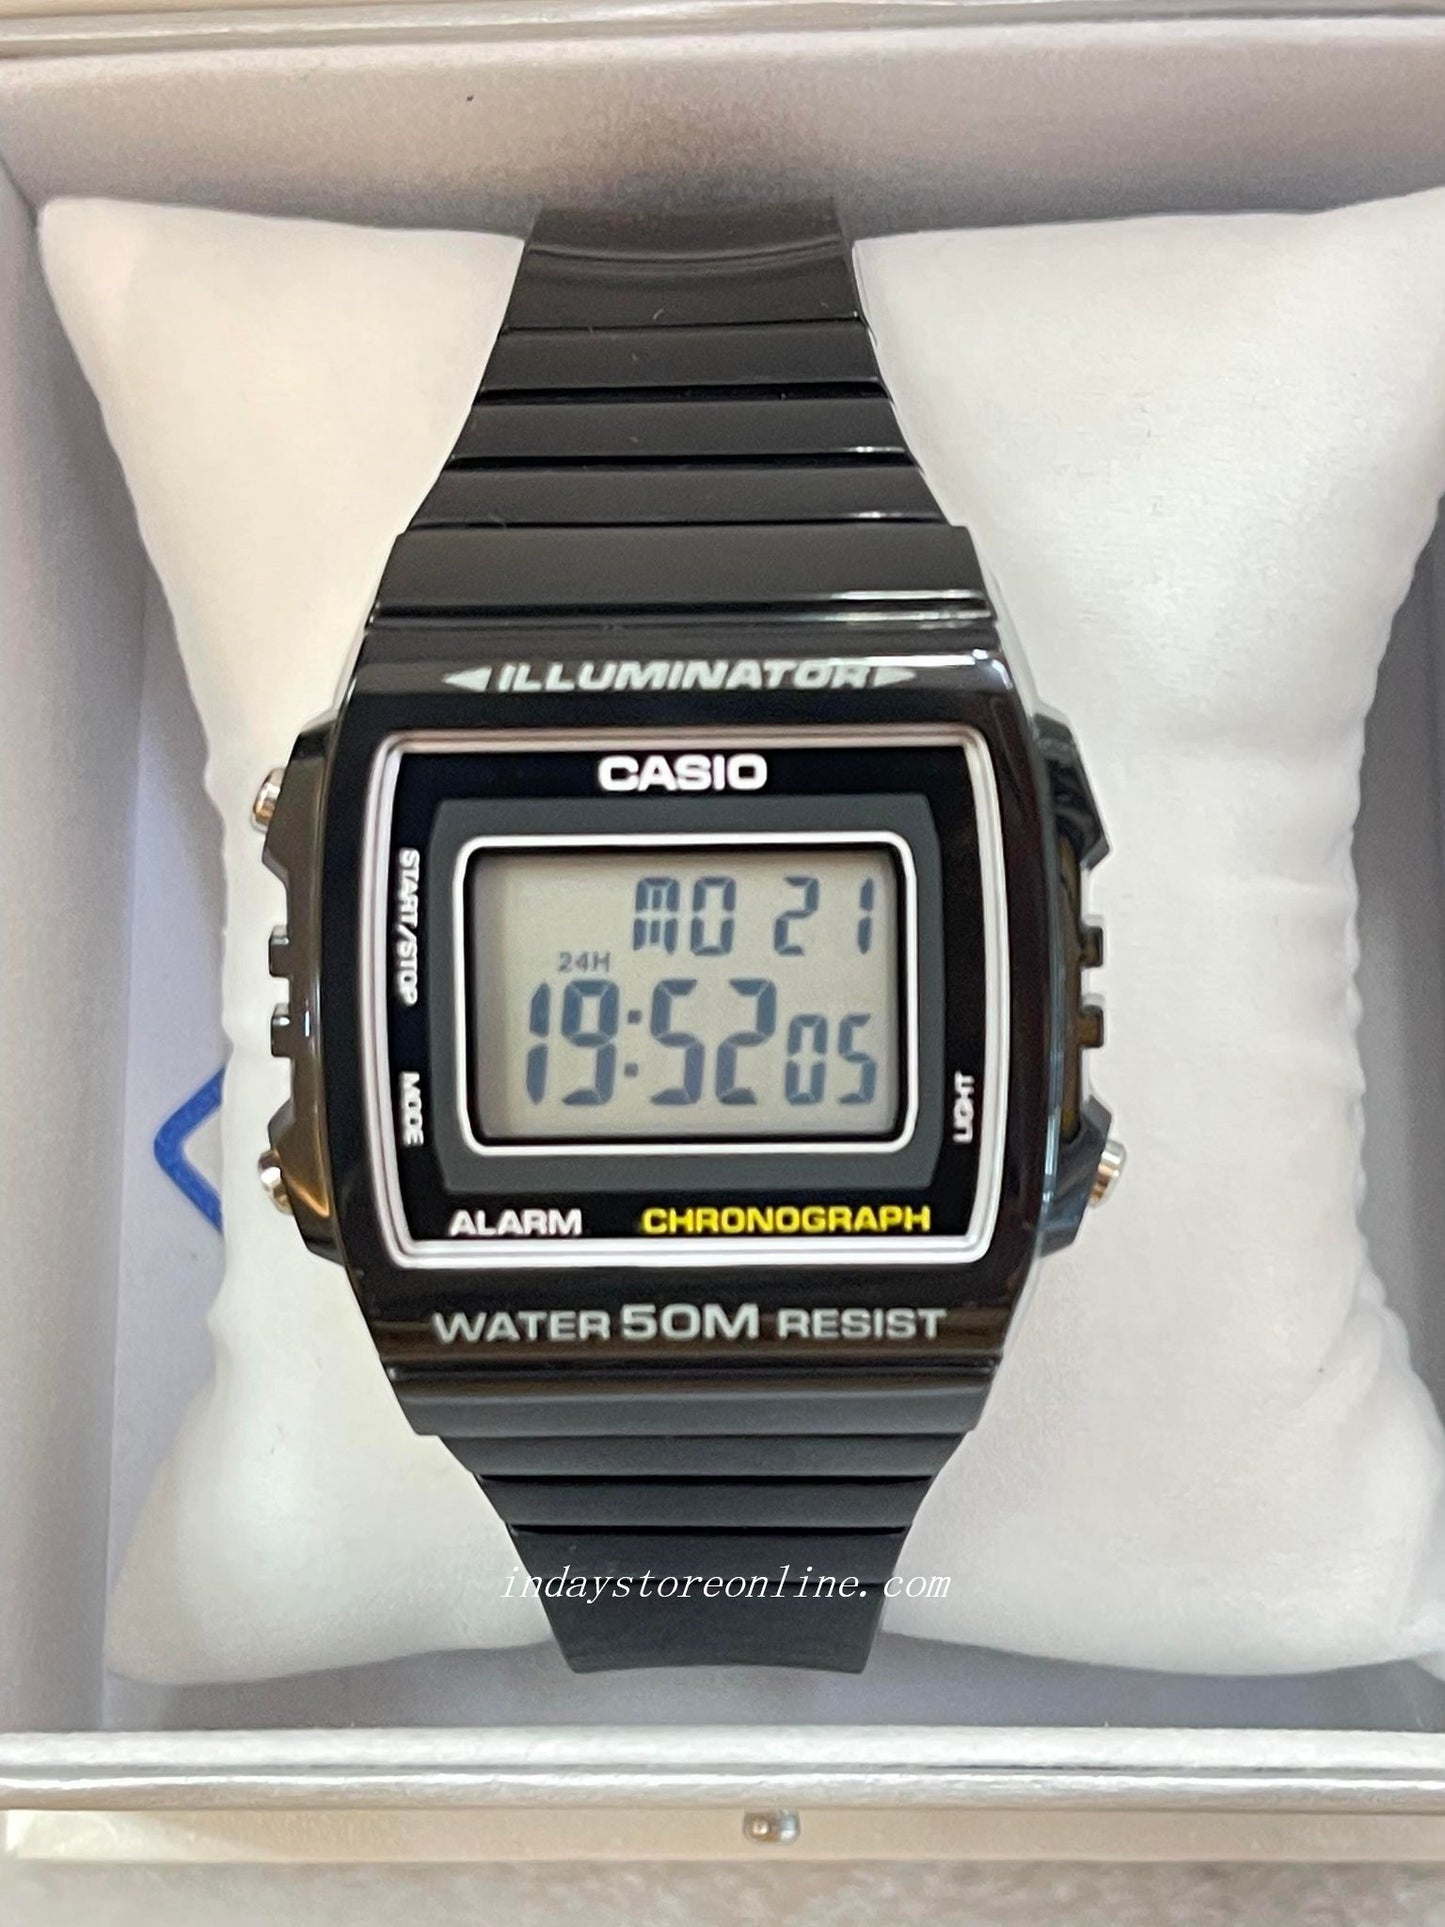 Casio Digital Women's Watch W-215H-1A Digital Resin Band Resin Glass Battery Life: 7 years